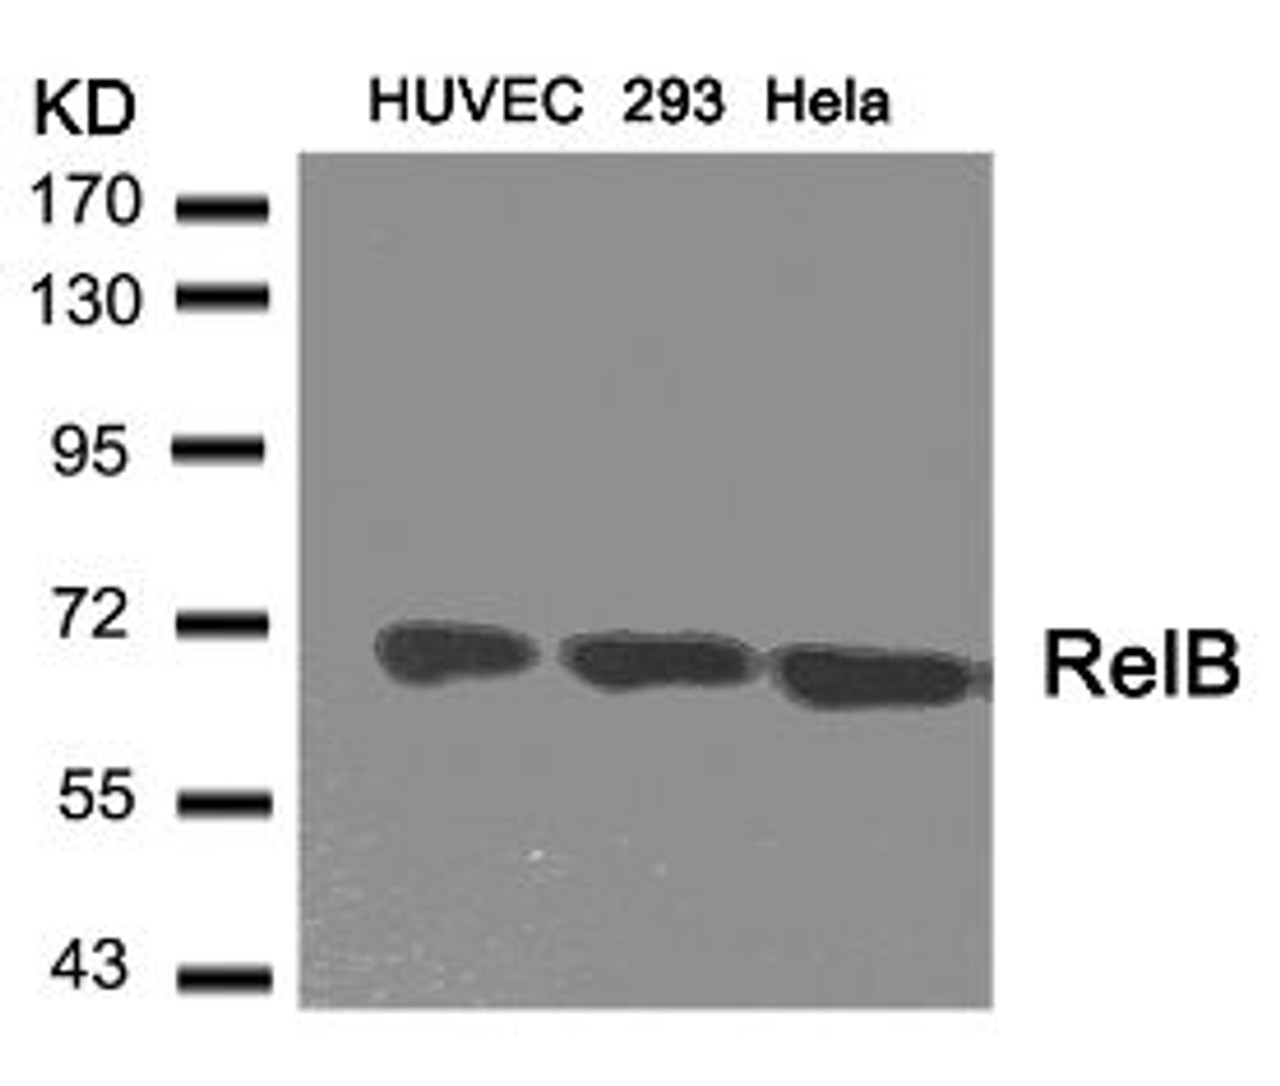 Western blot analysis of lysed extracts from HUVEC, 293 and HeLa cells using RelB (Ab-573) .